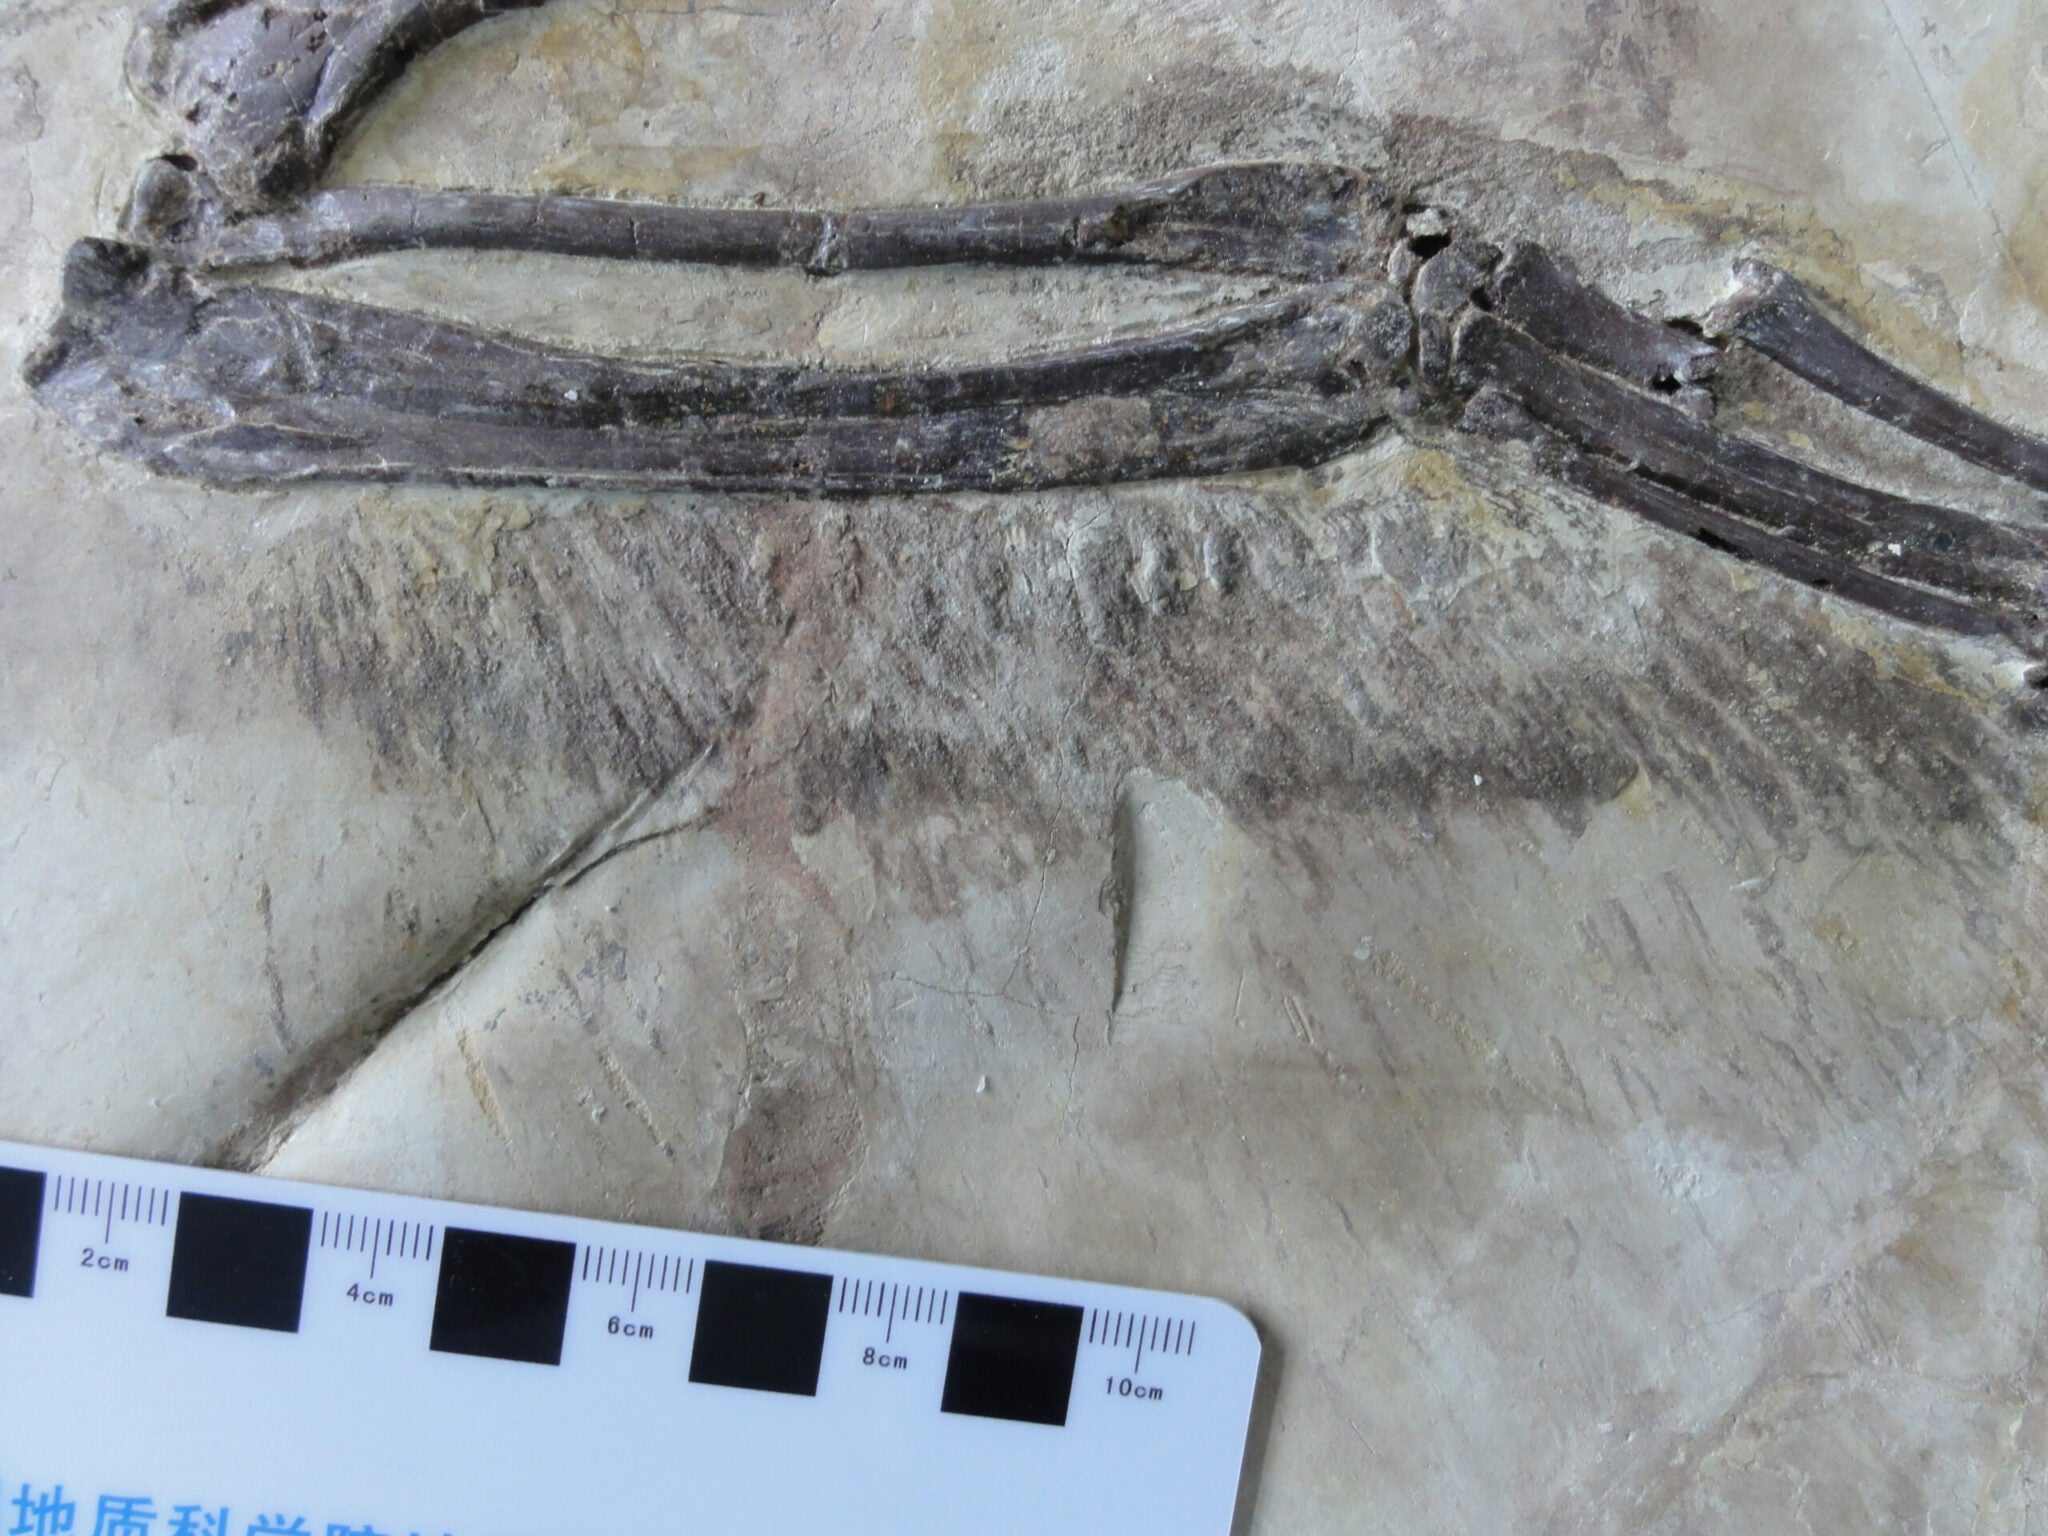 Scientists just found velociraptor’s feathered Chinese cousin 4